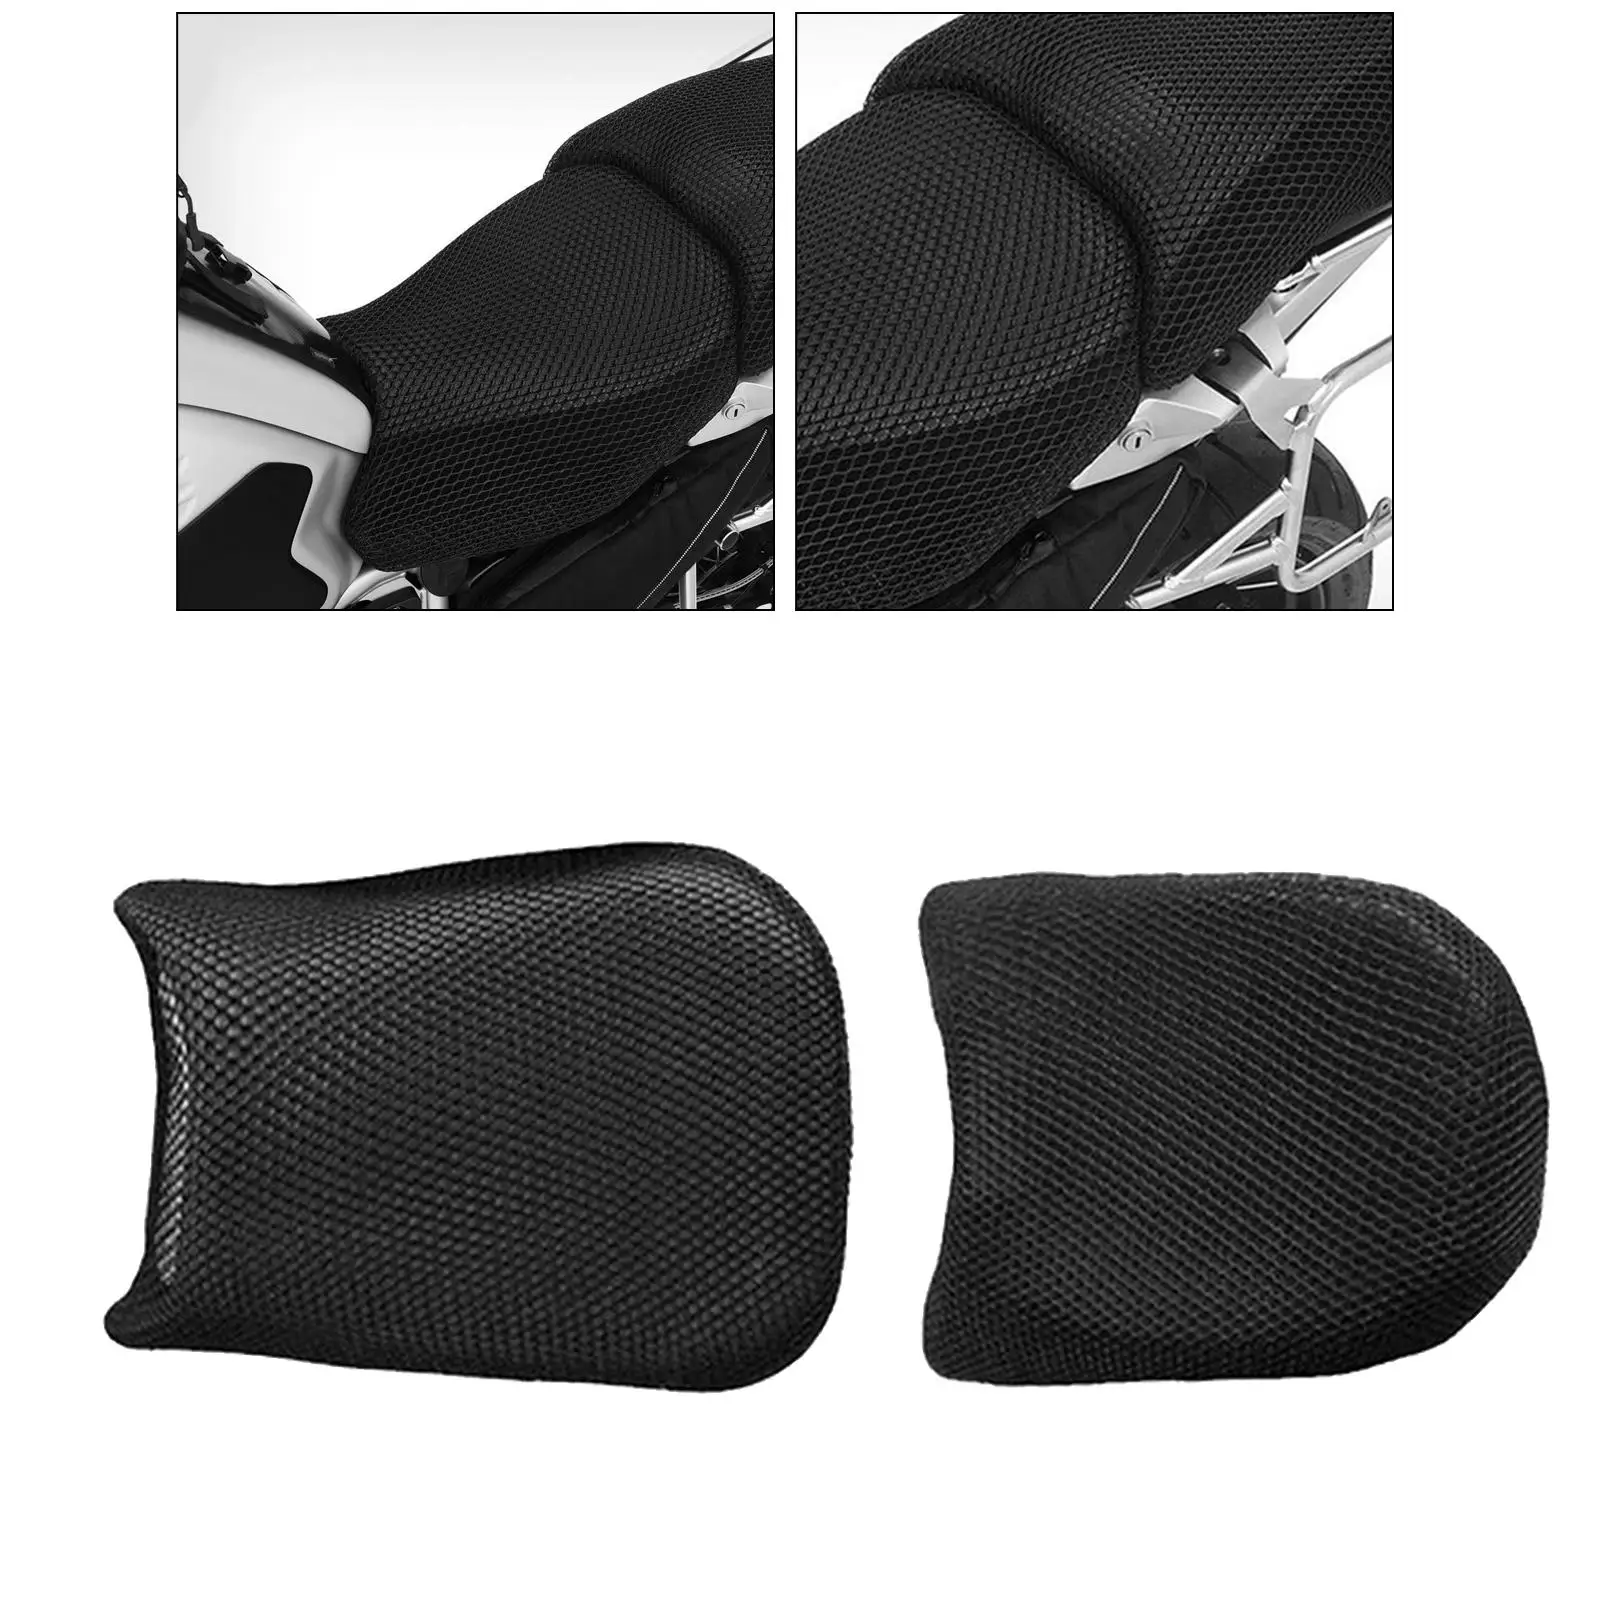 Saddle Seat Cover Protecting Cover Accessories Protection for R1200GS